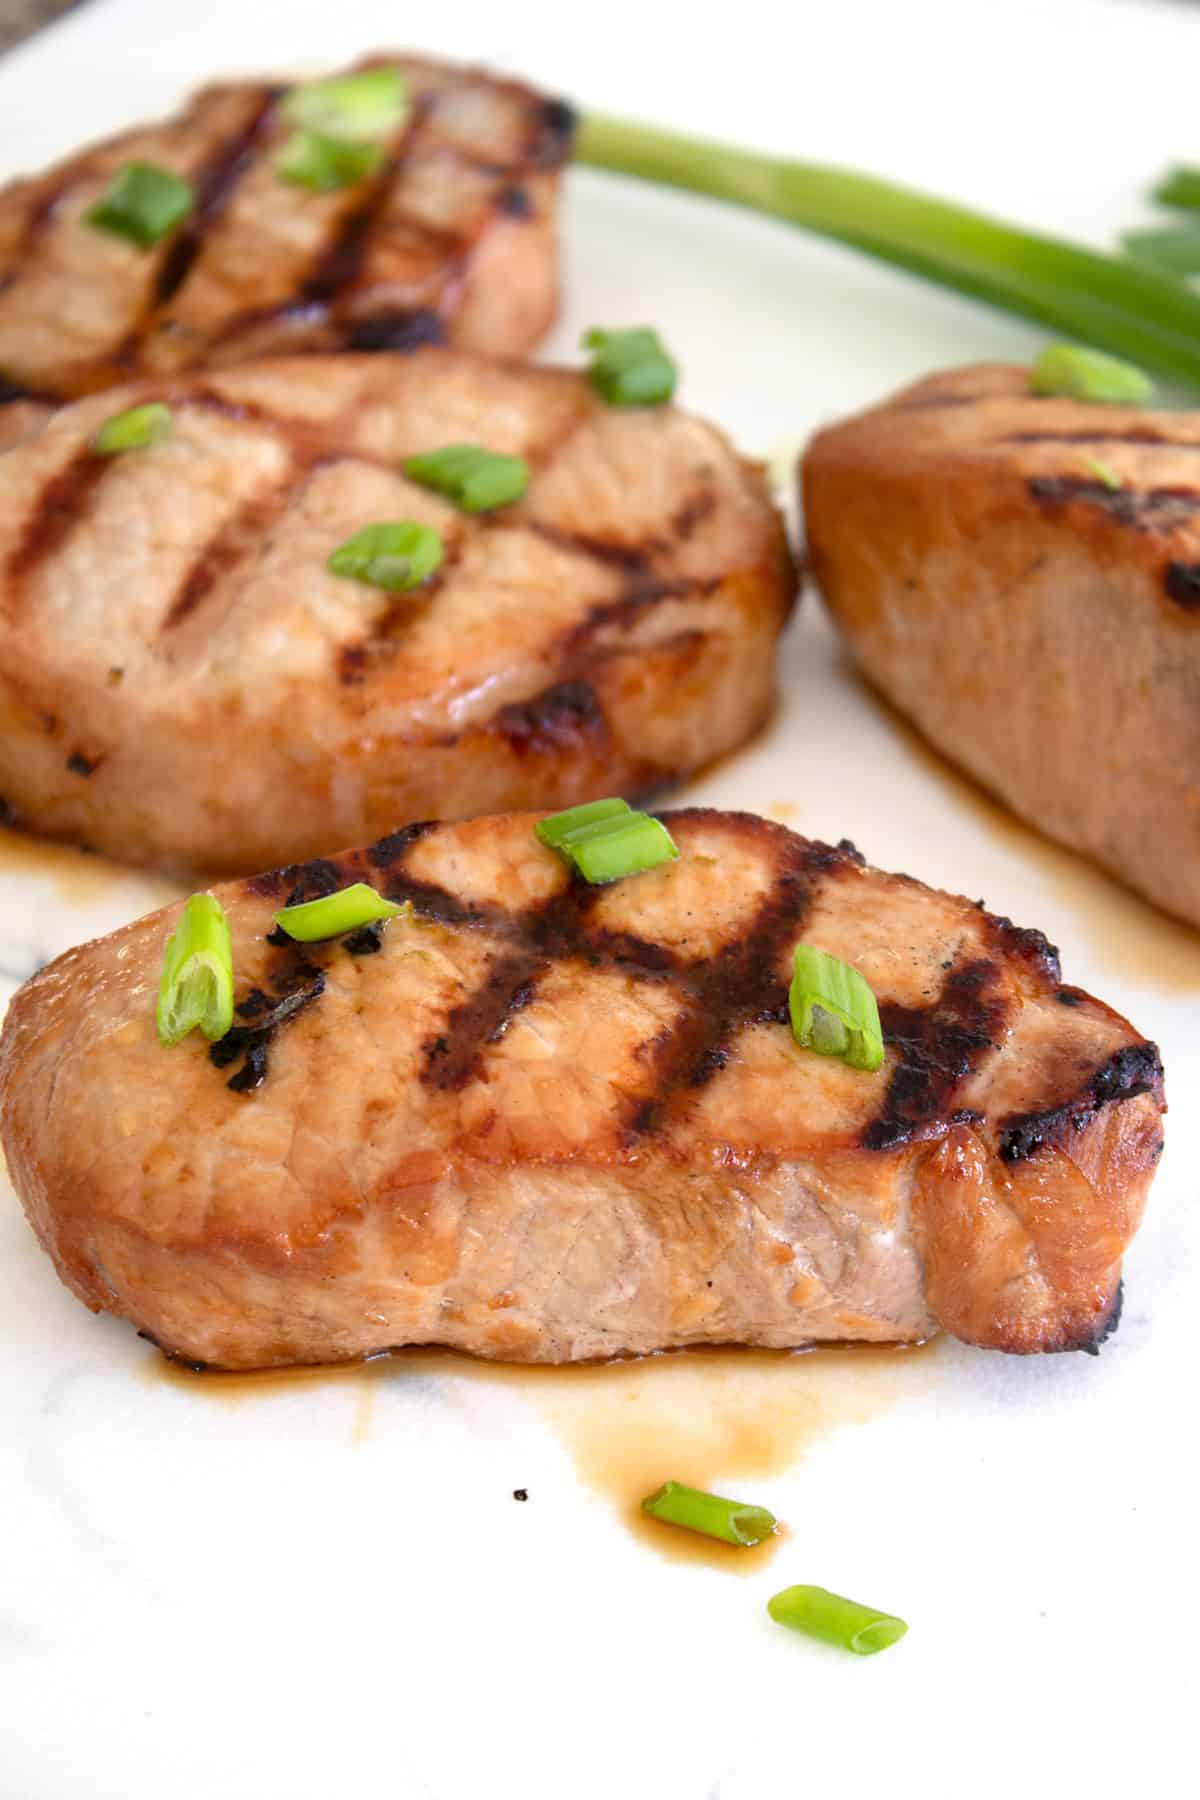 grilled pork chop garnished with green onions on white cutting board